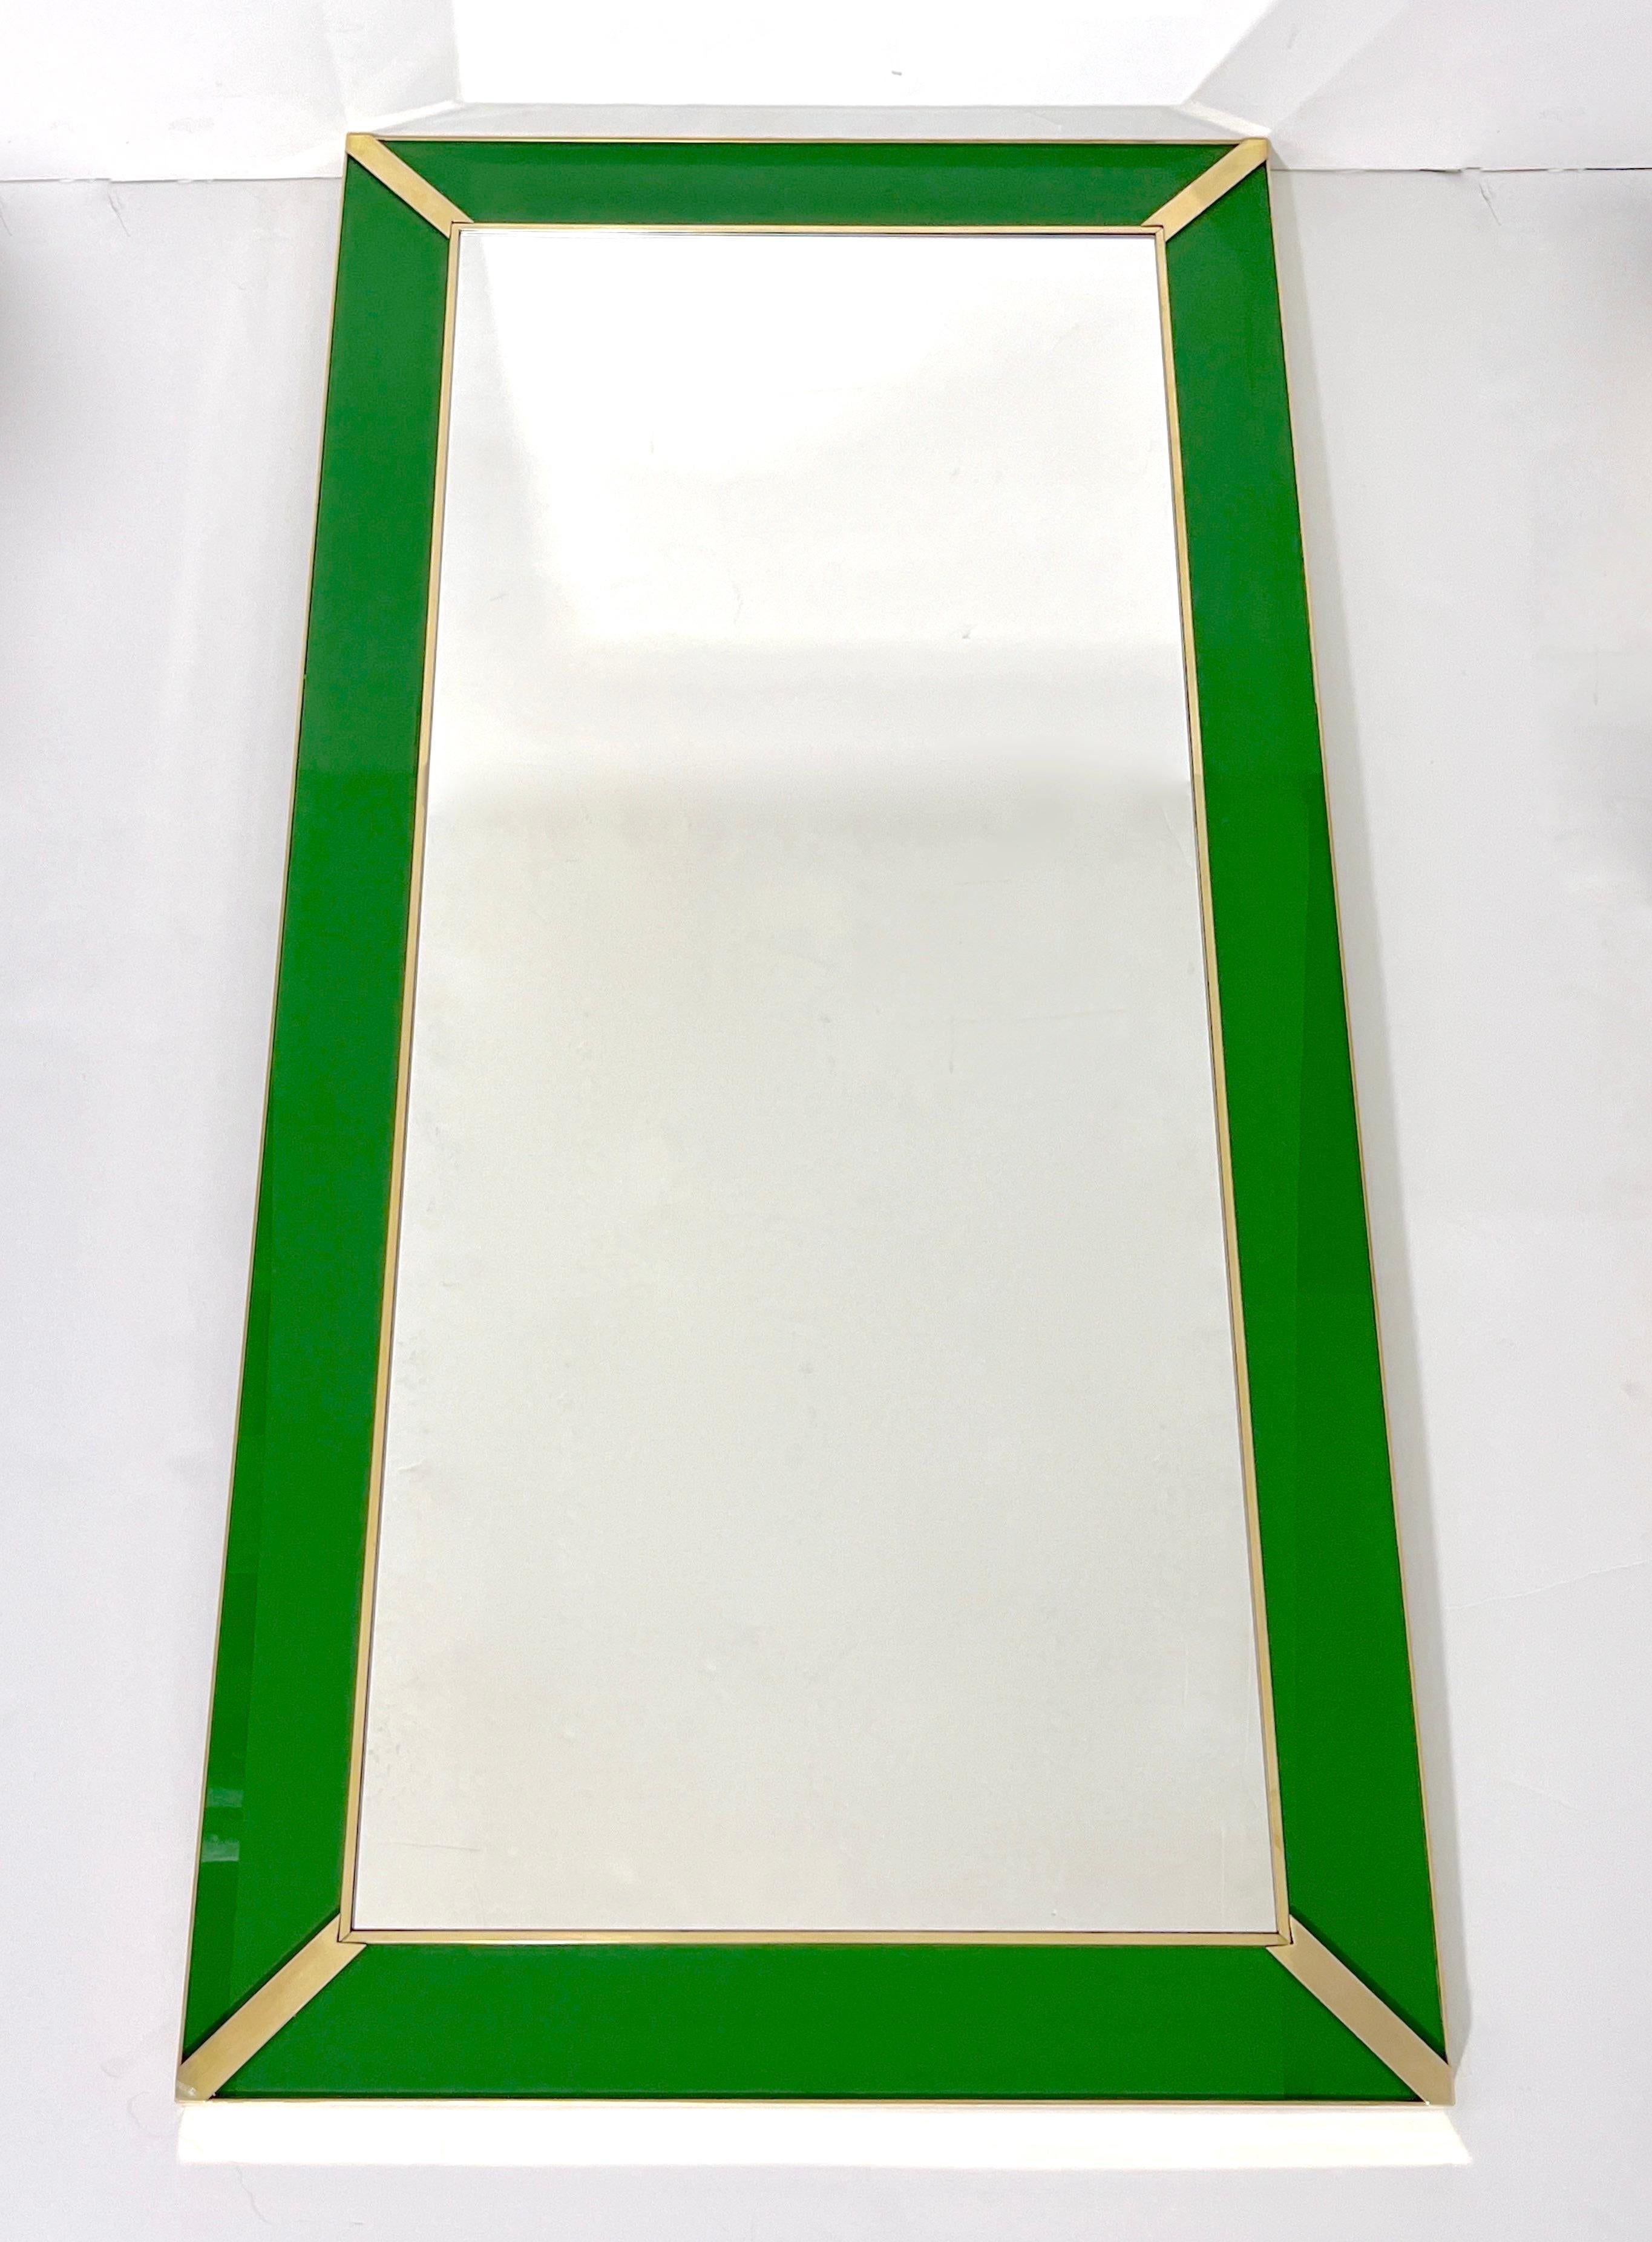 Contemporary Italian Minimalist Design Green Glass Mirror with Brass Accents For Sale 3